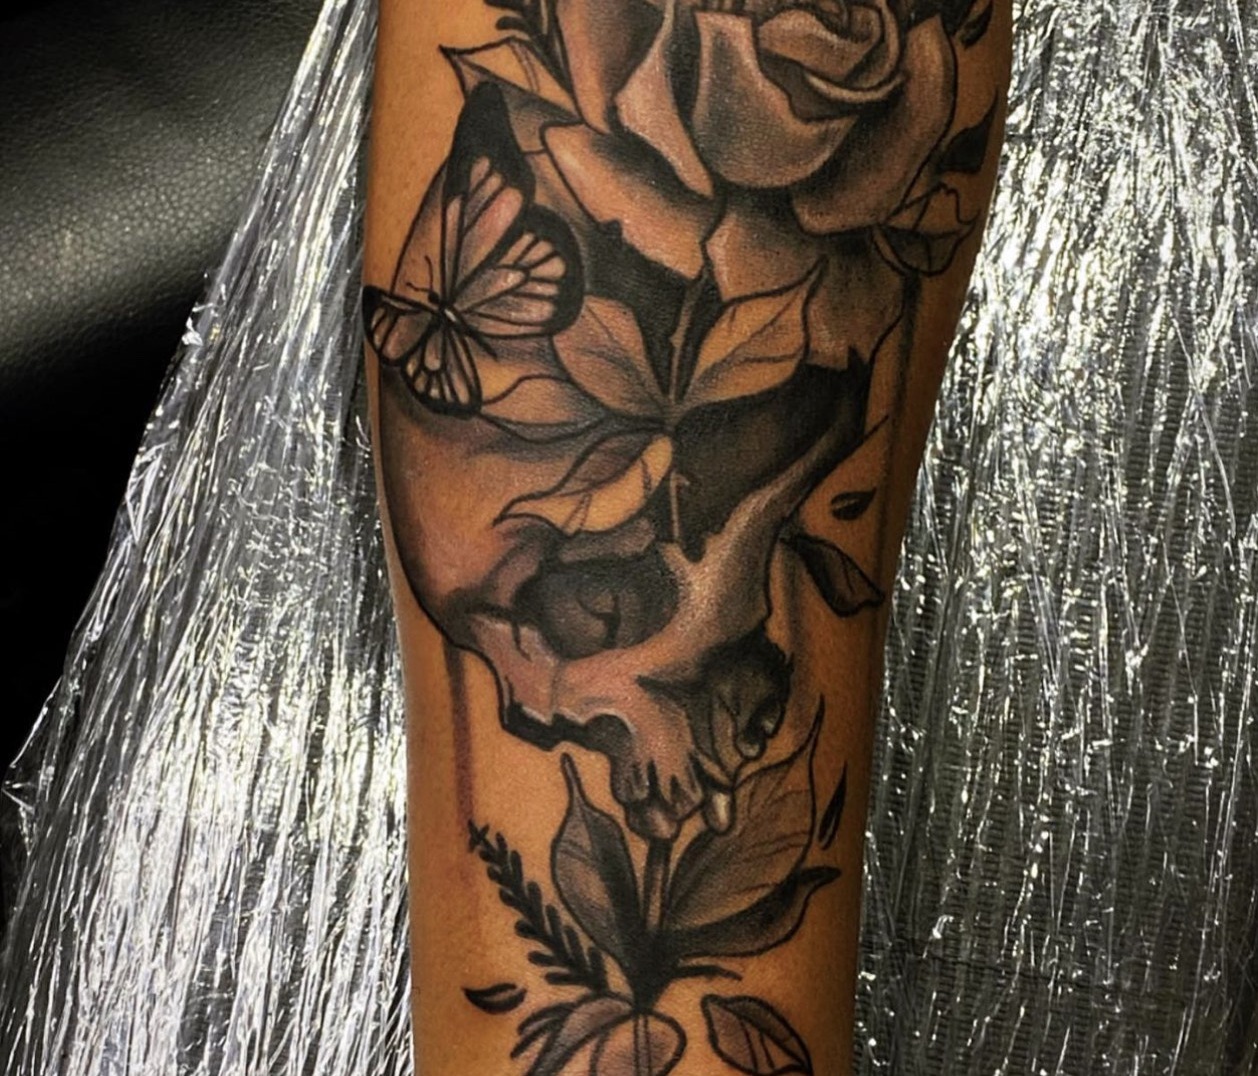 Butterfly And Rose Floral Tattoo By Khem At Iron Palm Tattoos in downtown Atlanta, GA. Call 404 -973-7828 or stop by for a free consultation with Khem. Walk Ins are welcome.